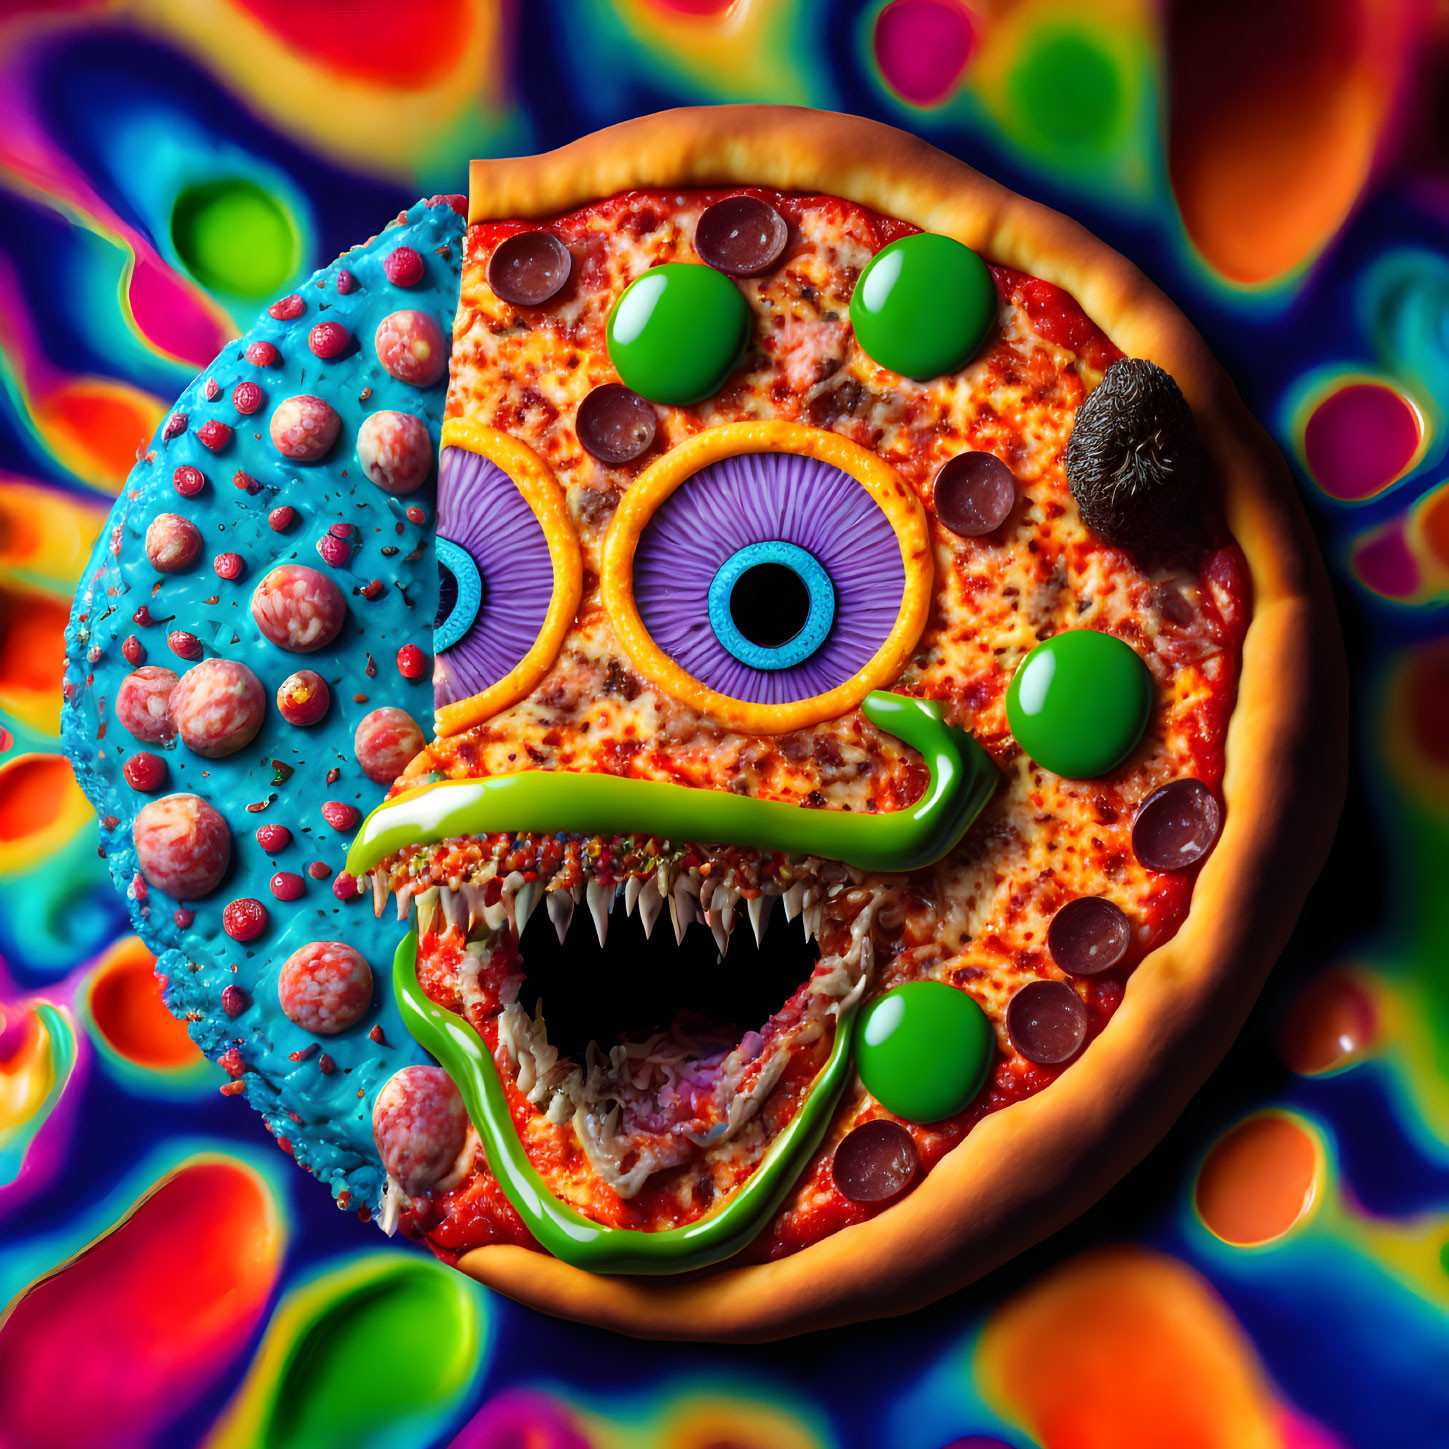 Vibrant surreal pizza with monstrous face and candy crust on psychedelic background